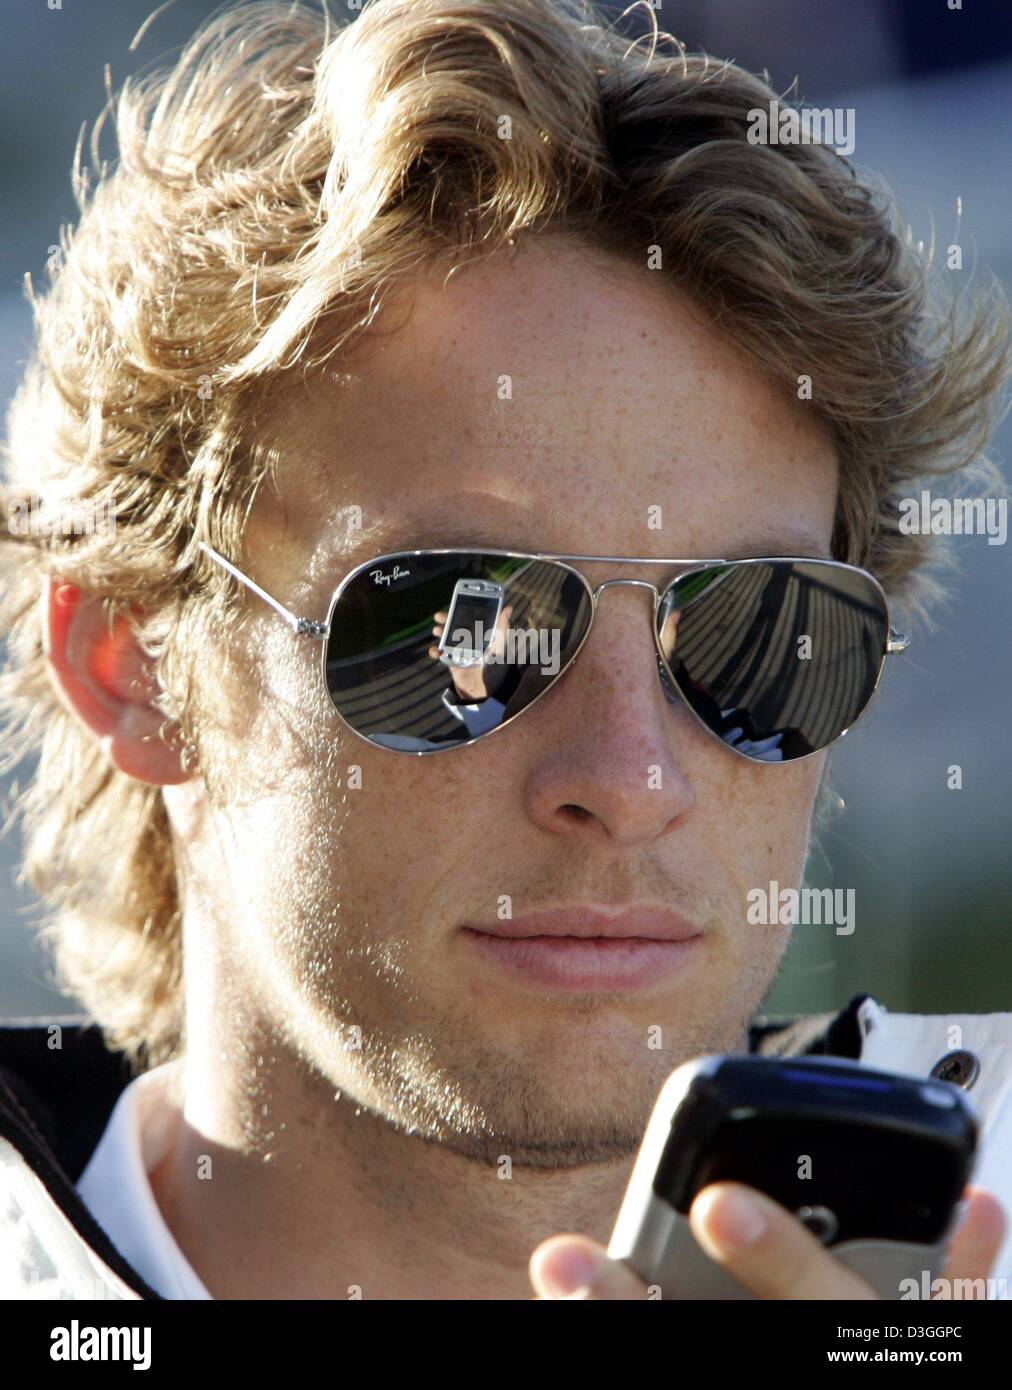 (dpa) - British formula one pilot Jenson Button (BAR Honda) looks on the display of his mobile phone on the formula one racing track in Spa-Francorchamps, Belgium, Friday, 27 August 2004. The Belgian Grand Prix will be held in Spa on Sunday, 29 August 2004. Stock Photo